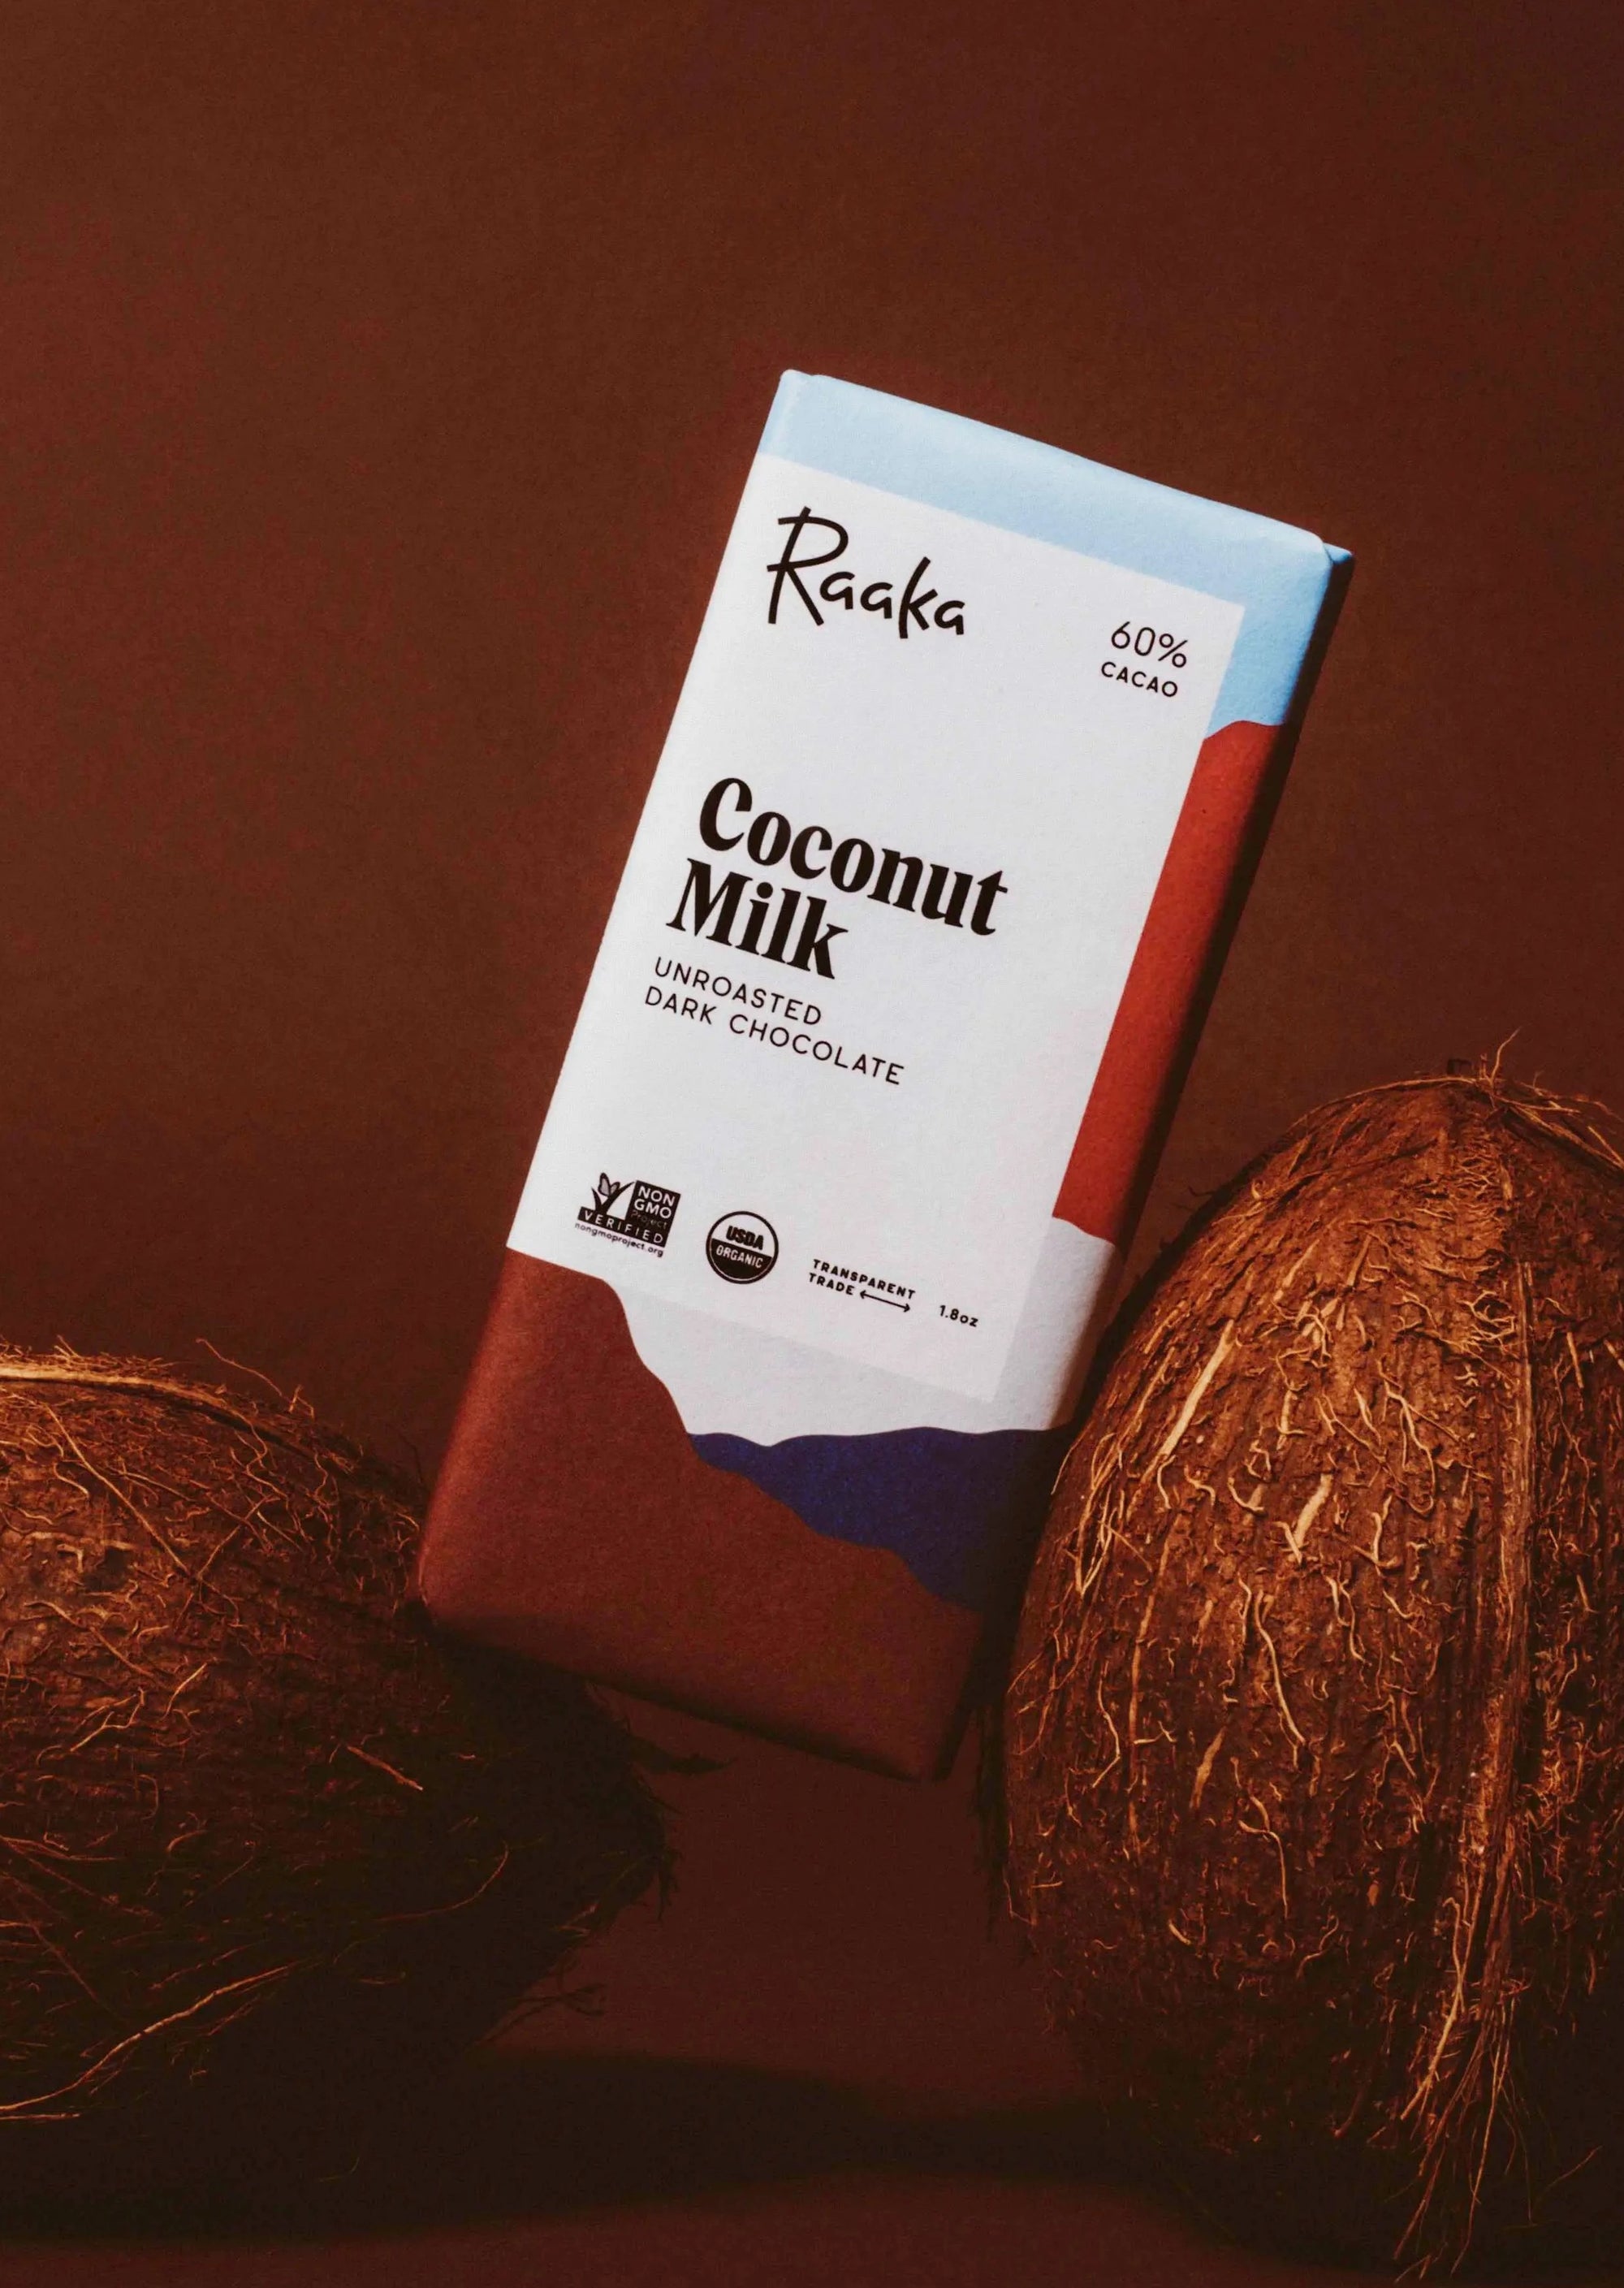 photo of the coconut milk chocolate bar leaning against two coconuts with a brown background